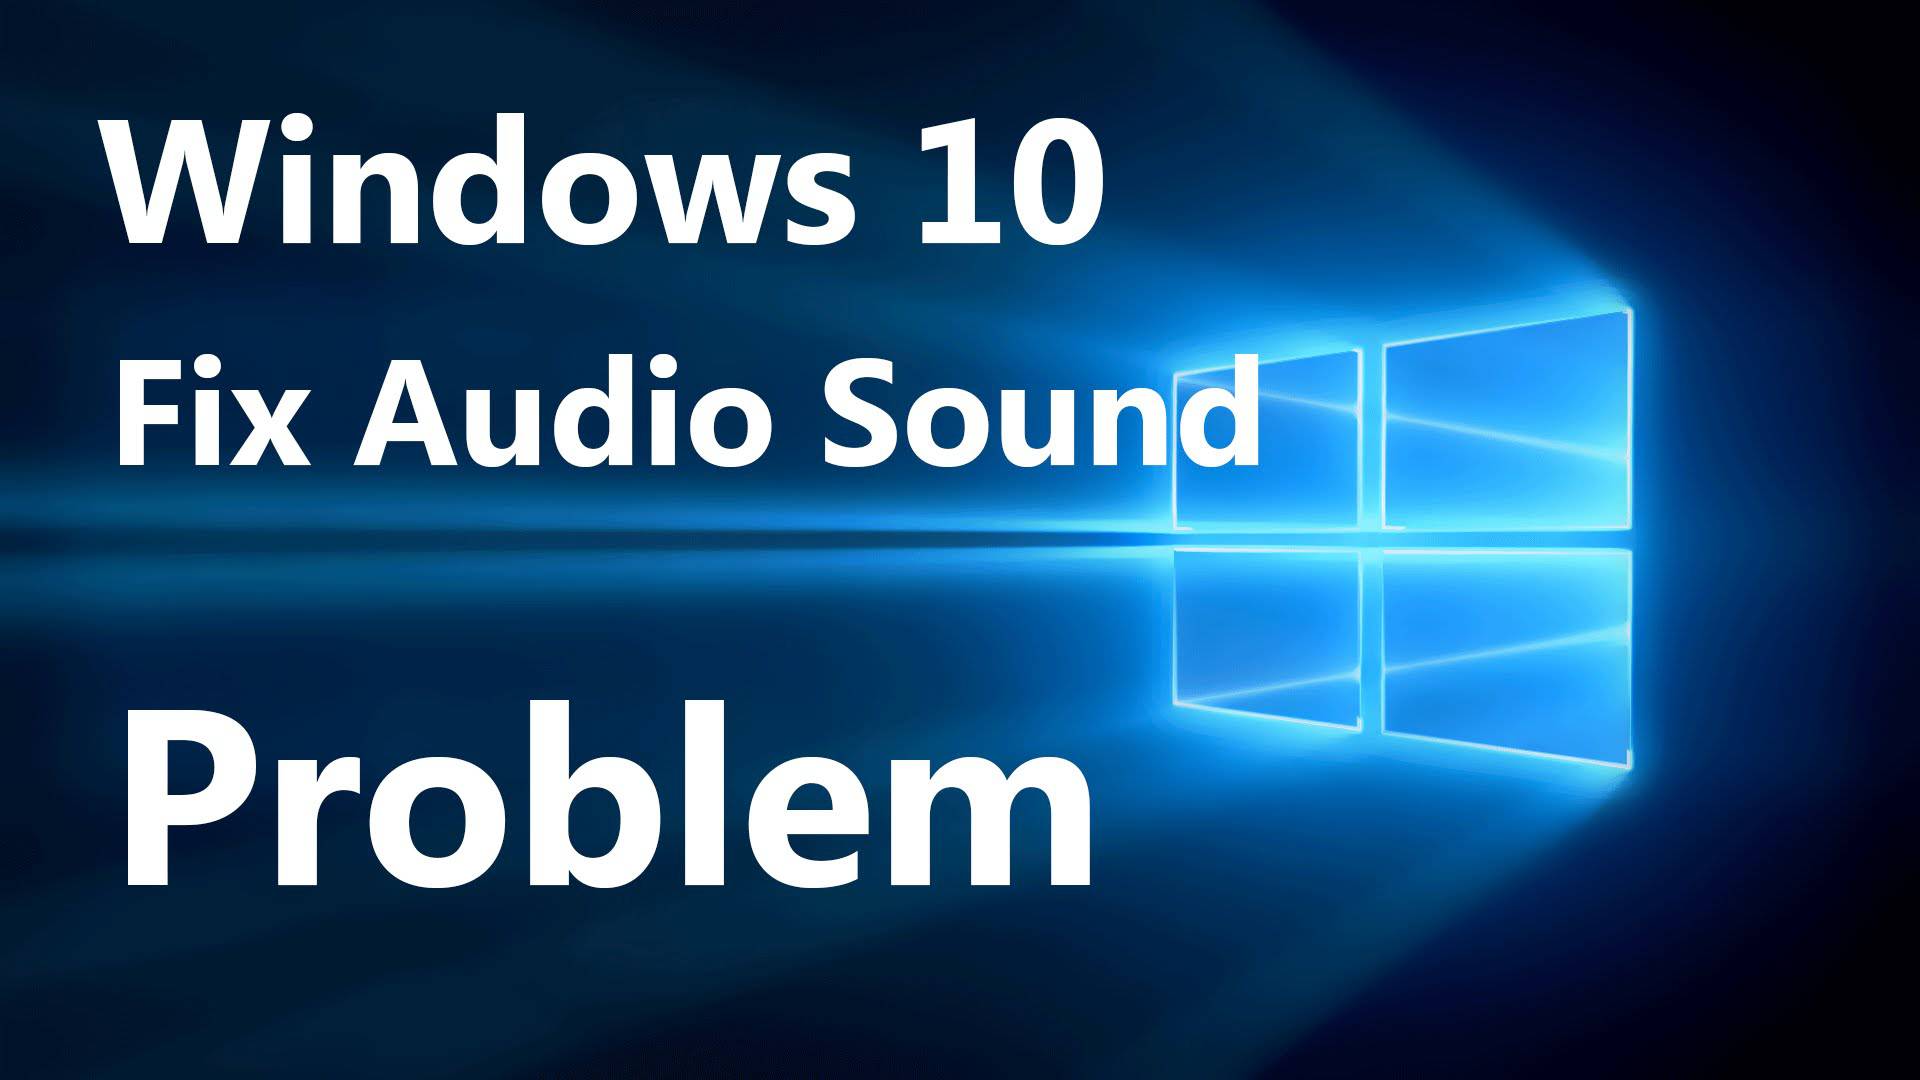 how to record video on computer screen with sound windows 10